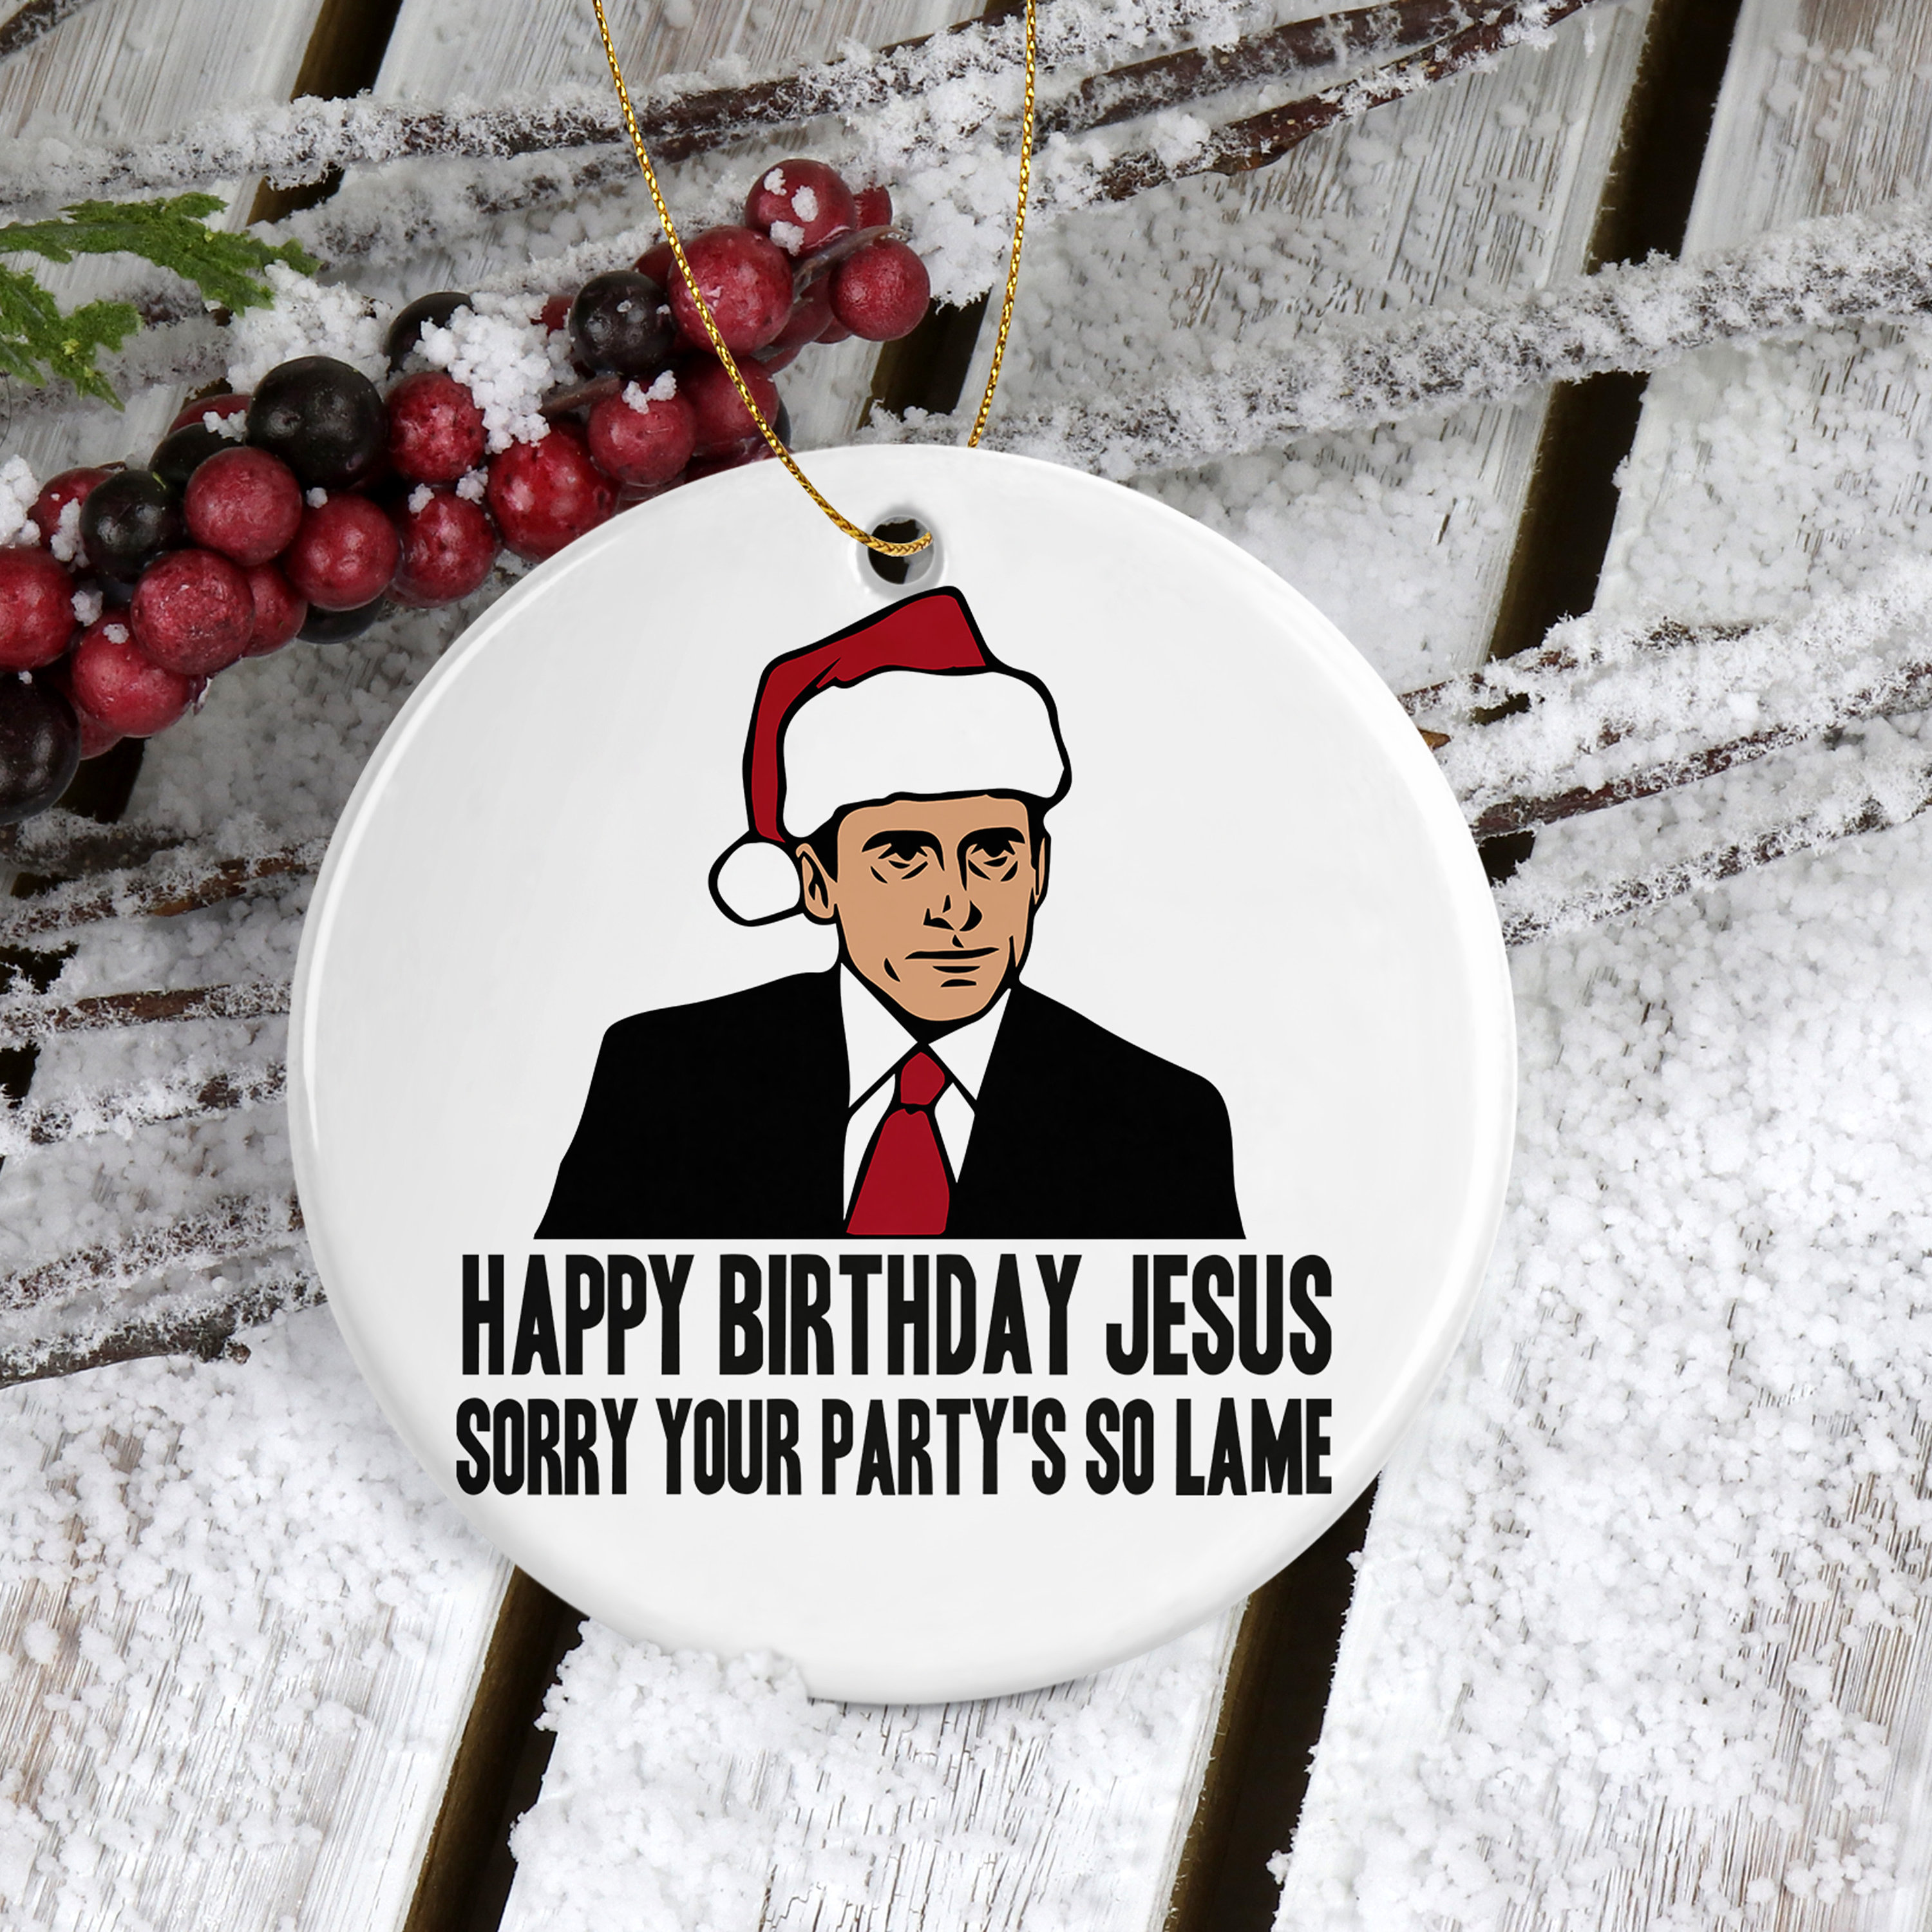 Well Happy Birthday Jesus The Office Gifts For Family Christmas Holiday  Ugly Sweater - Horusteez